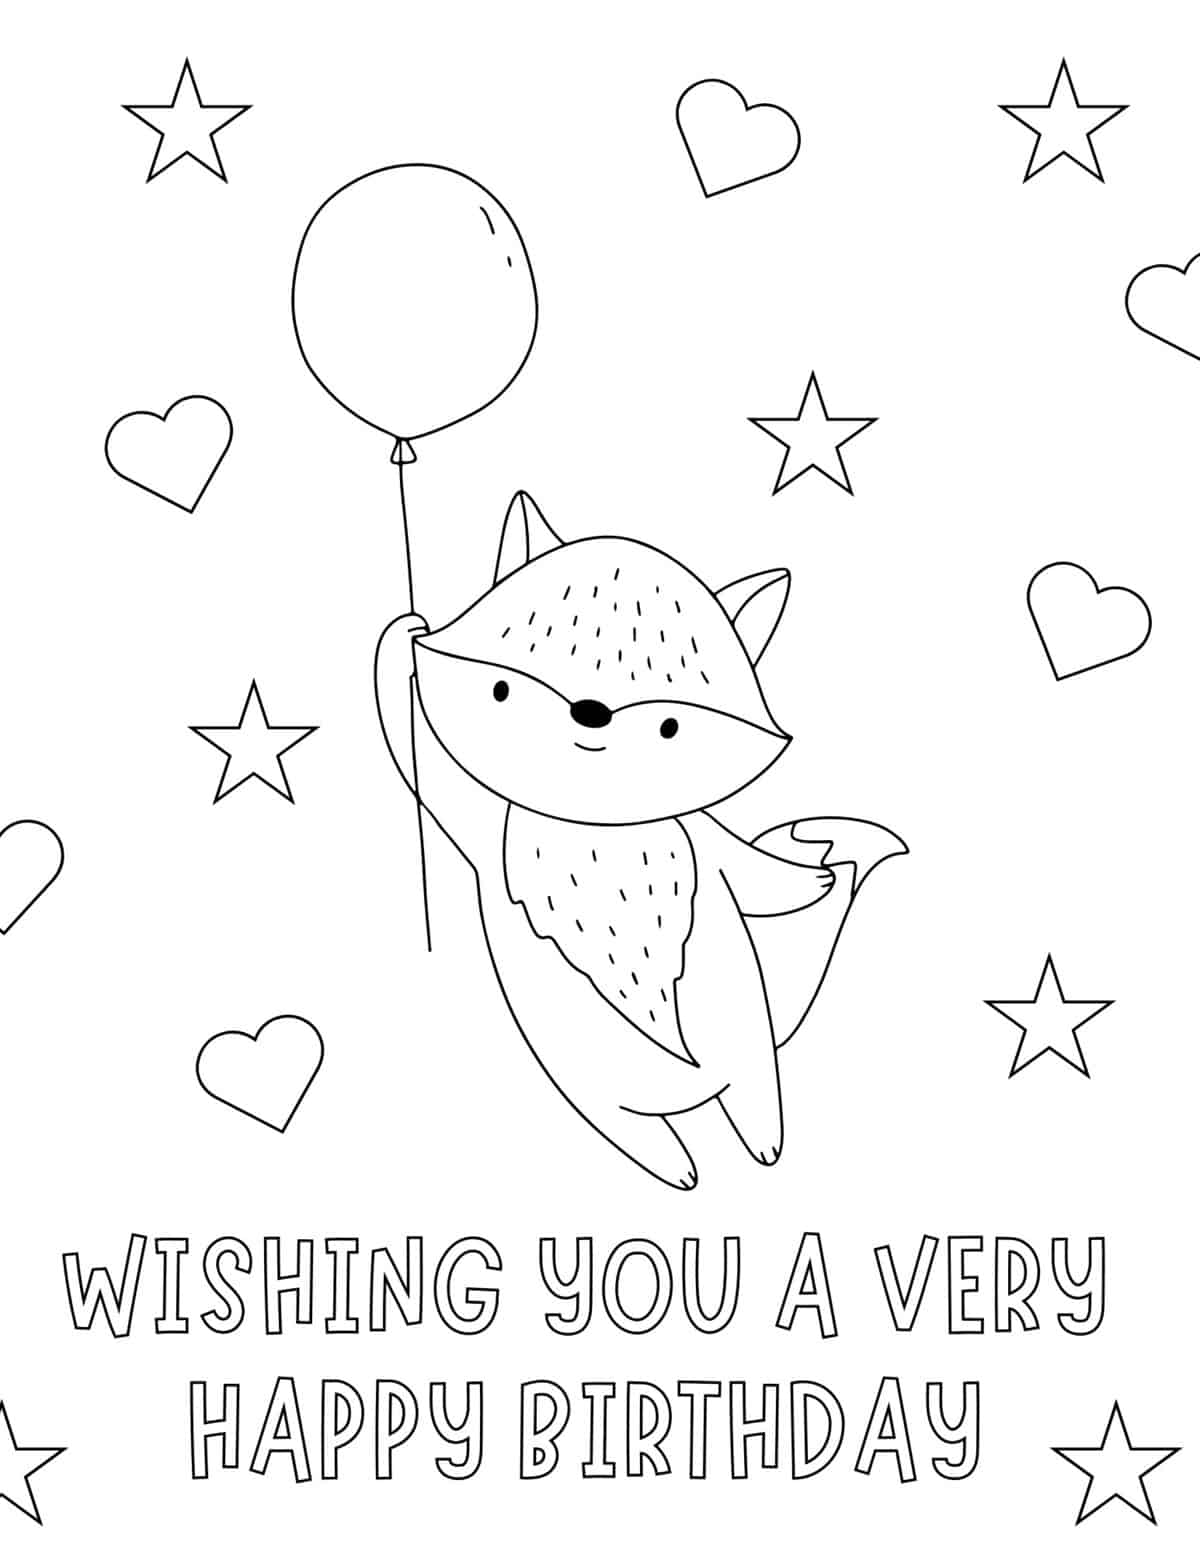 fox floating in the air holding a balloon with stars and hearts in the background